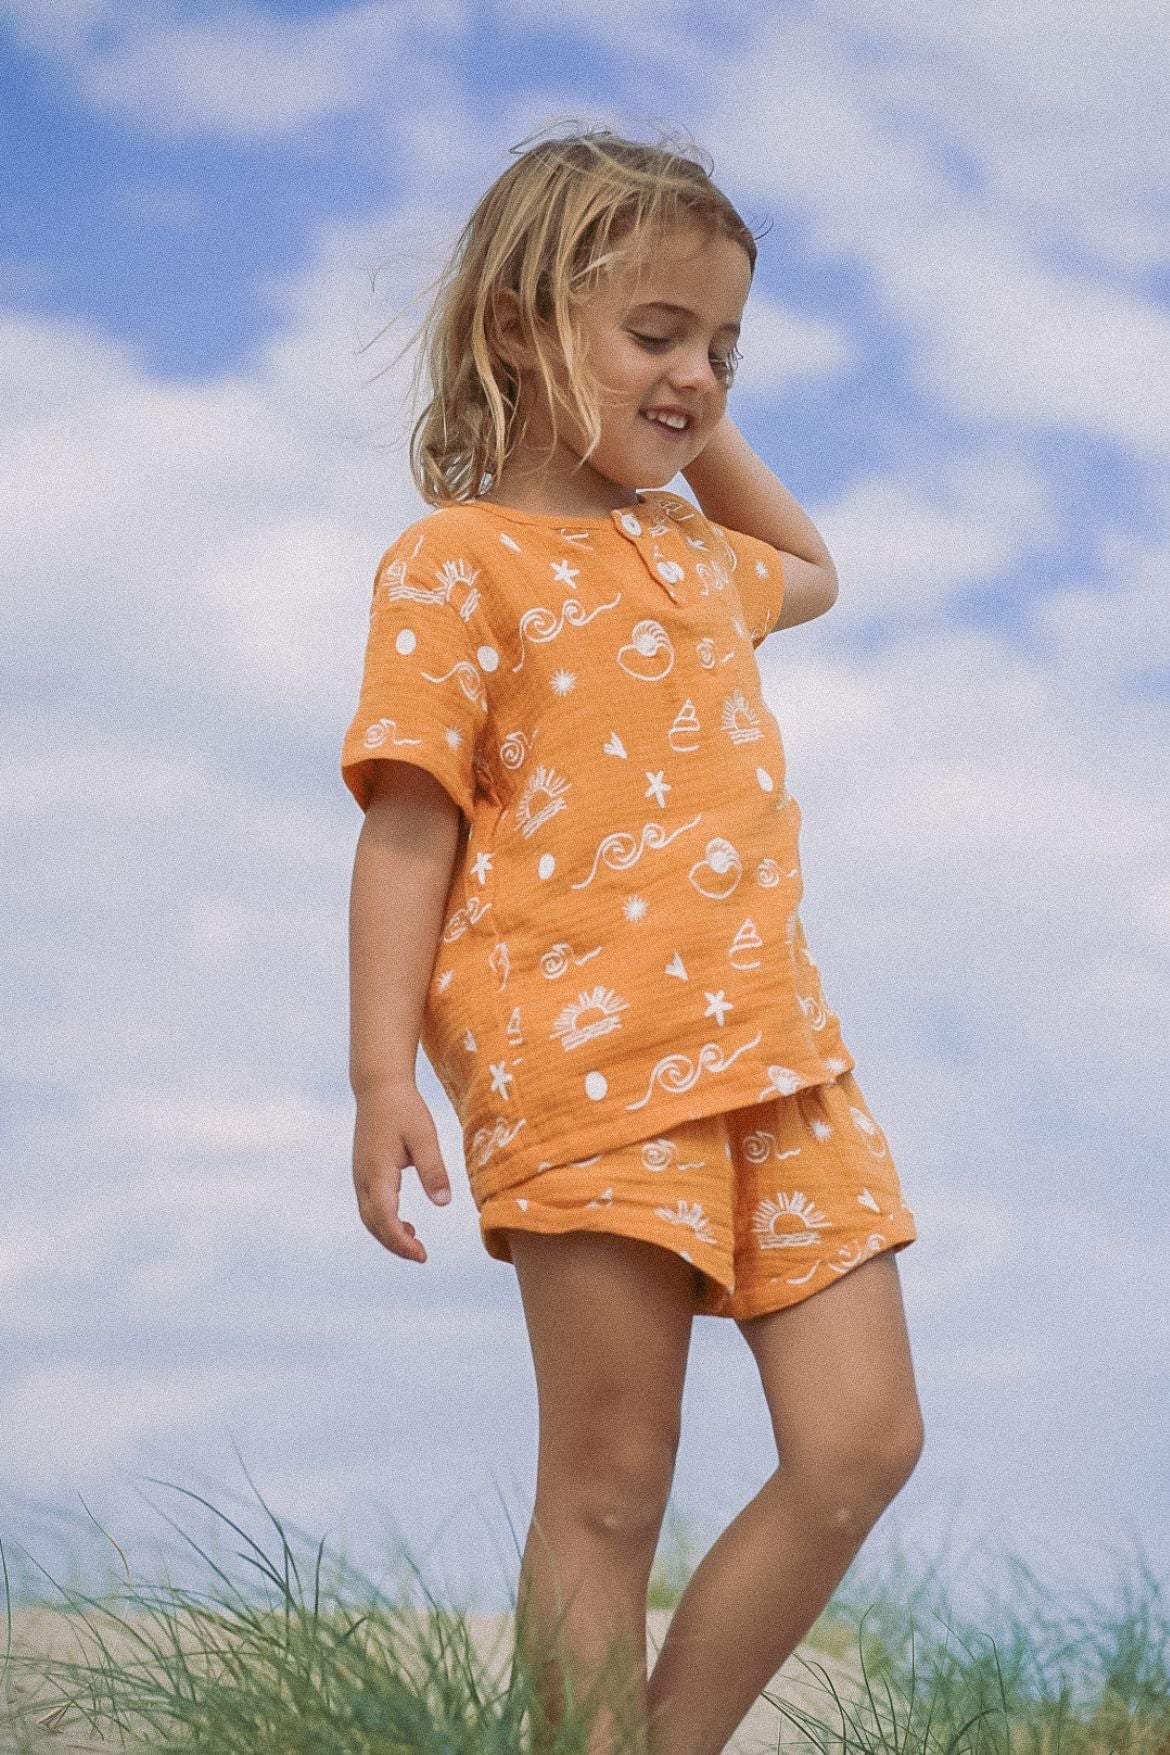 Little Ease - ocean inspired cotton set with shells and waves for kids